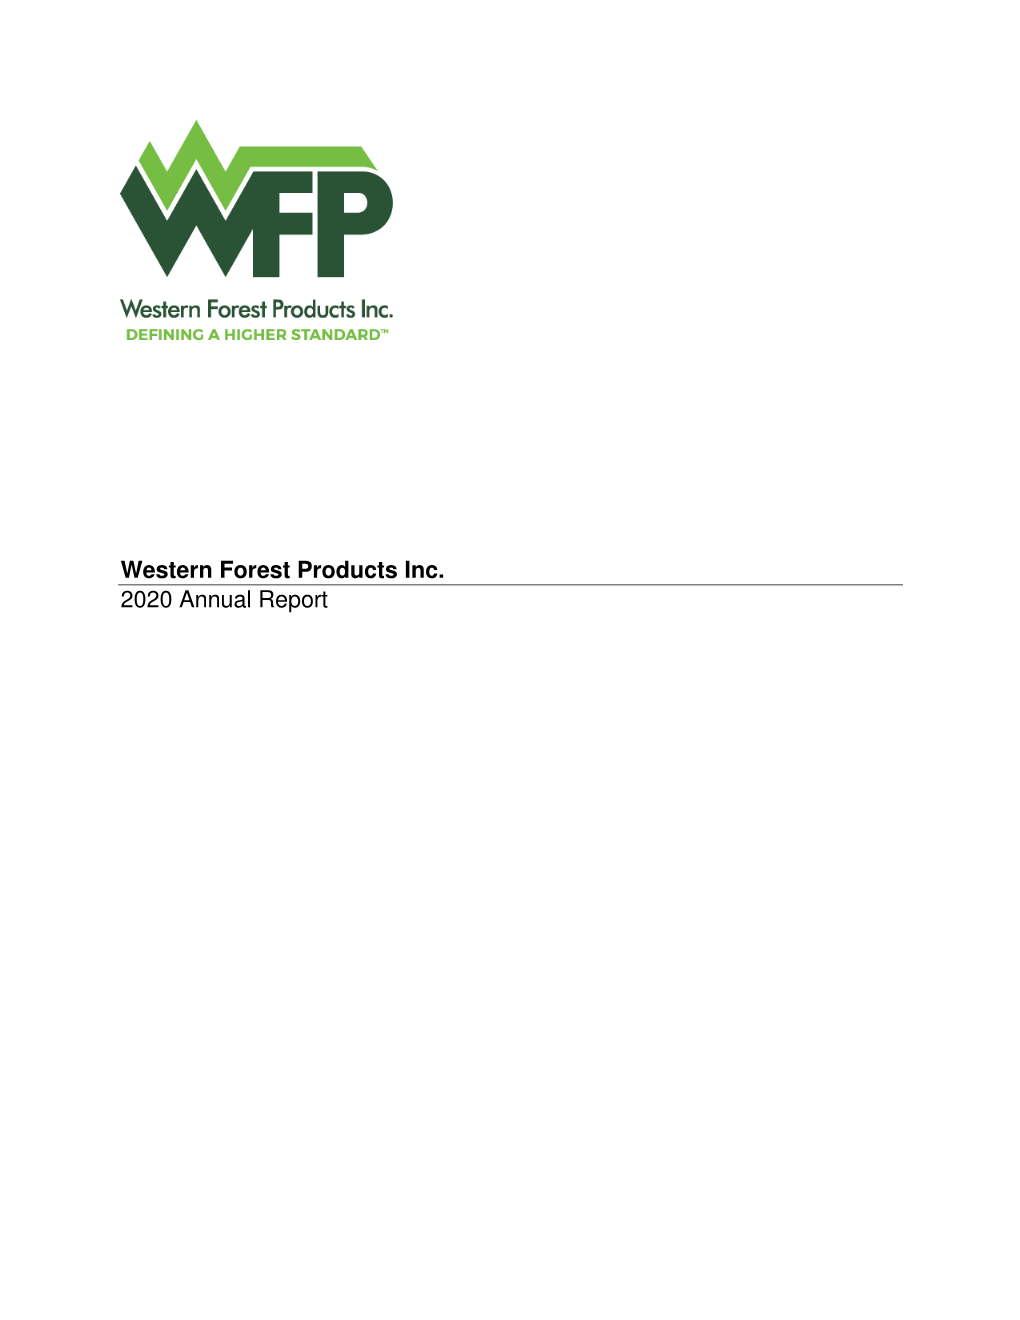 Western Forest Products Inc. 2020 Annual Report